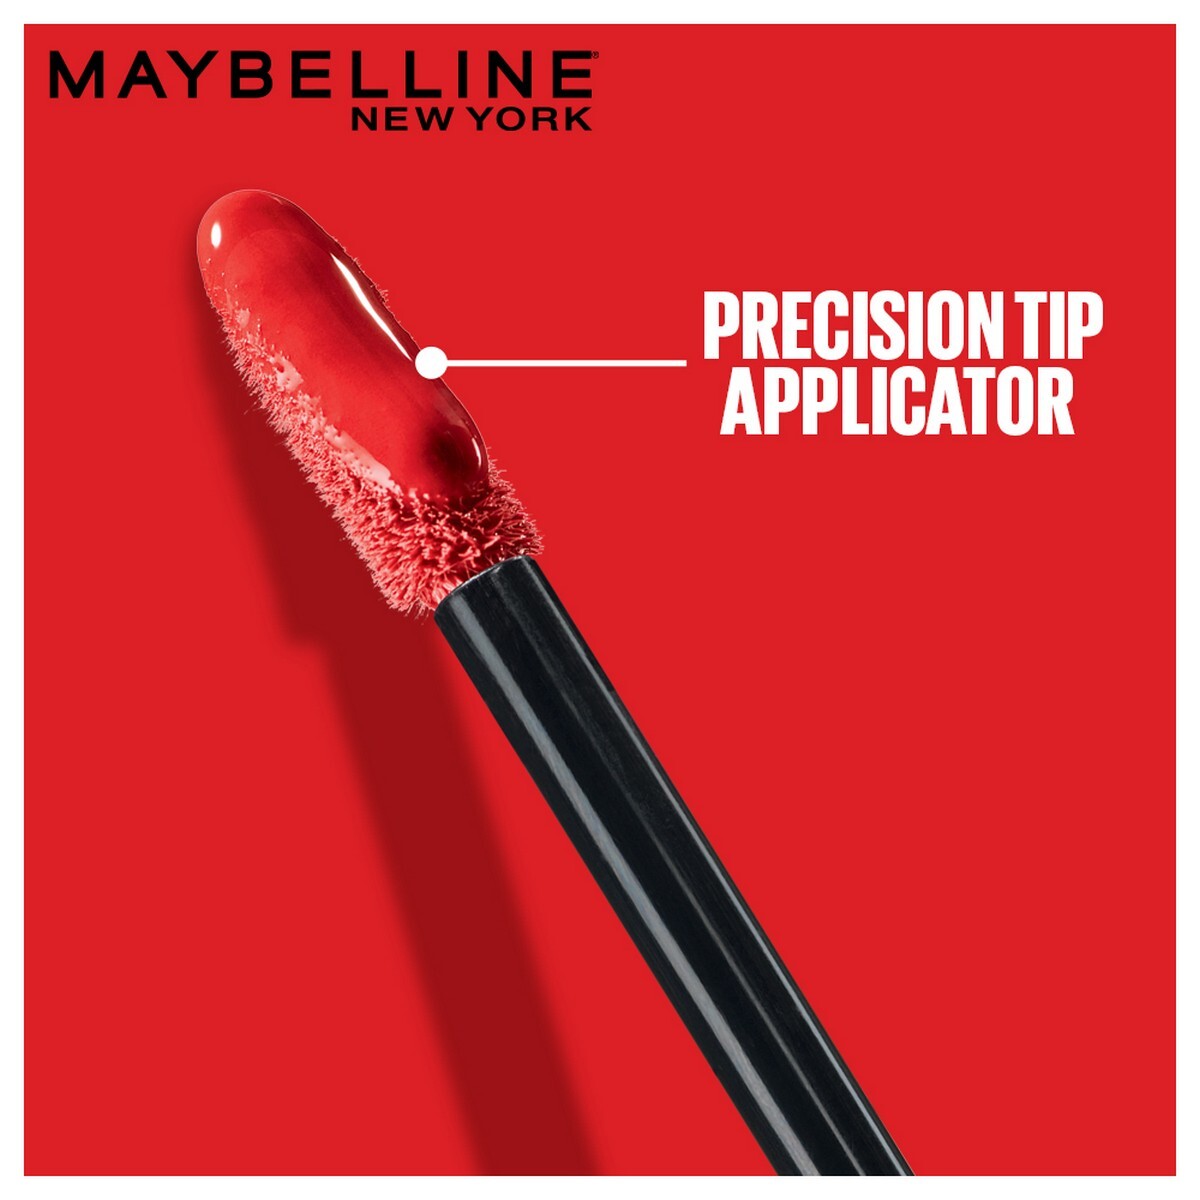 Maybelline Superstay Vinyl Ink Liquid Lipstick, Coy , High Shine That Lasts for 16 HRs , Enriched With Vitamin E & Aloe